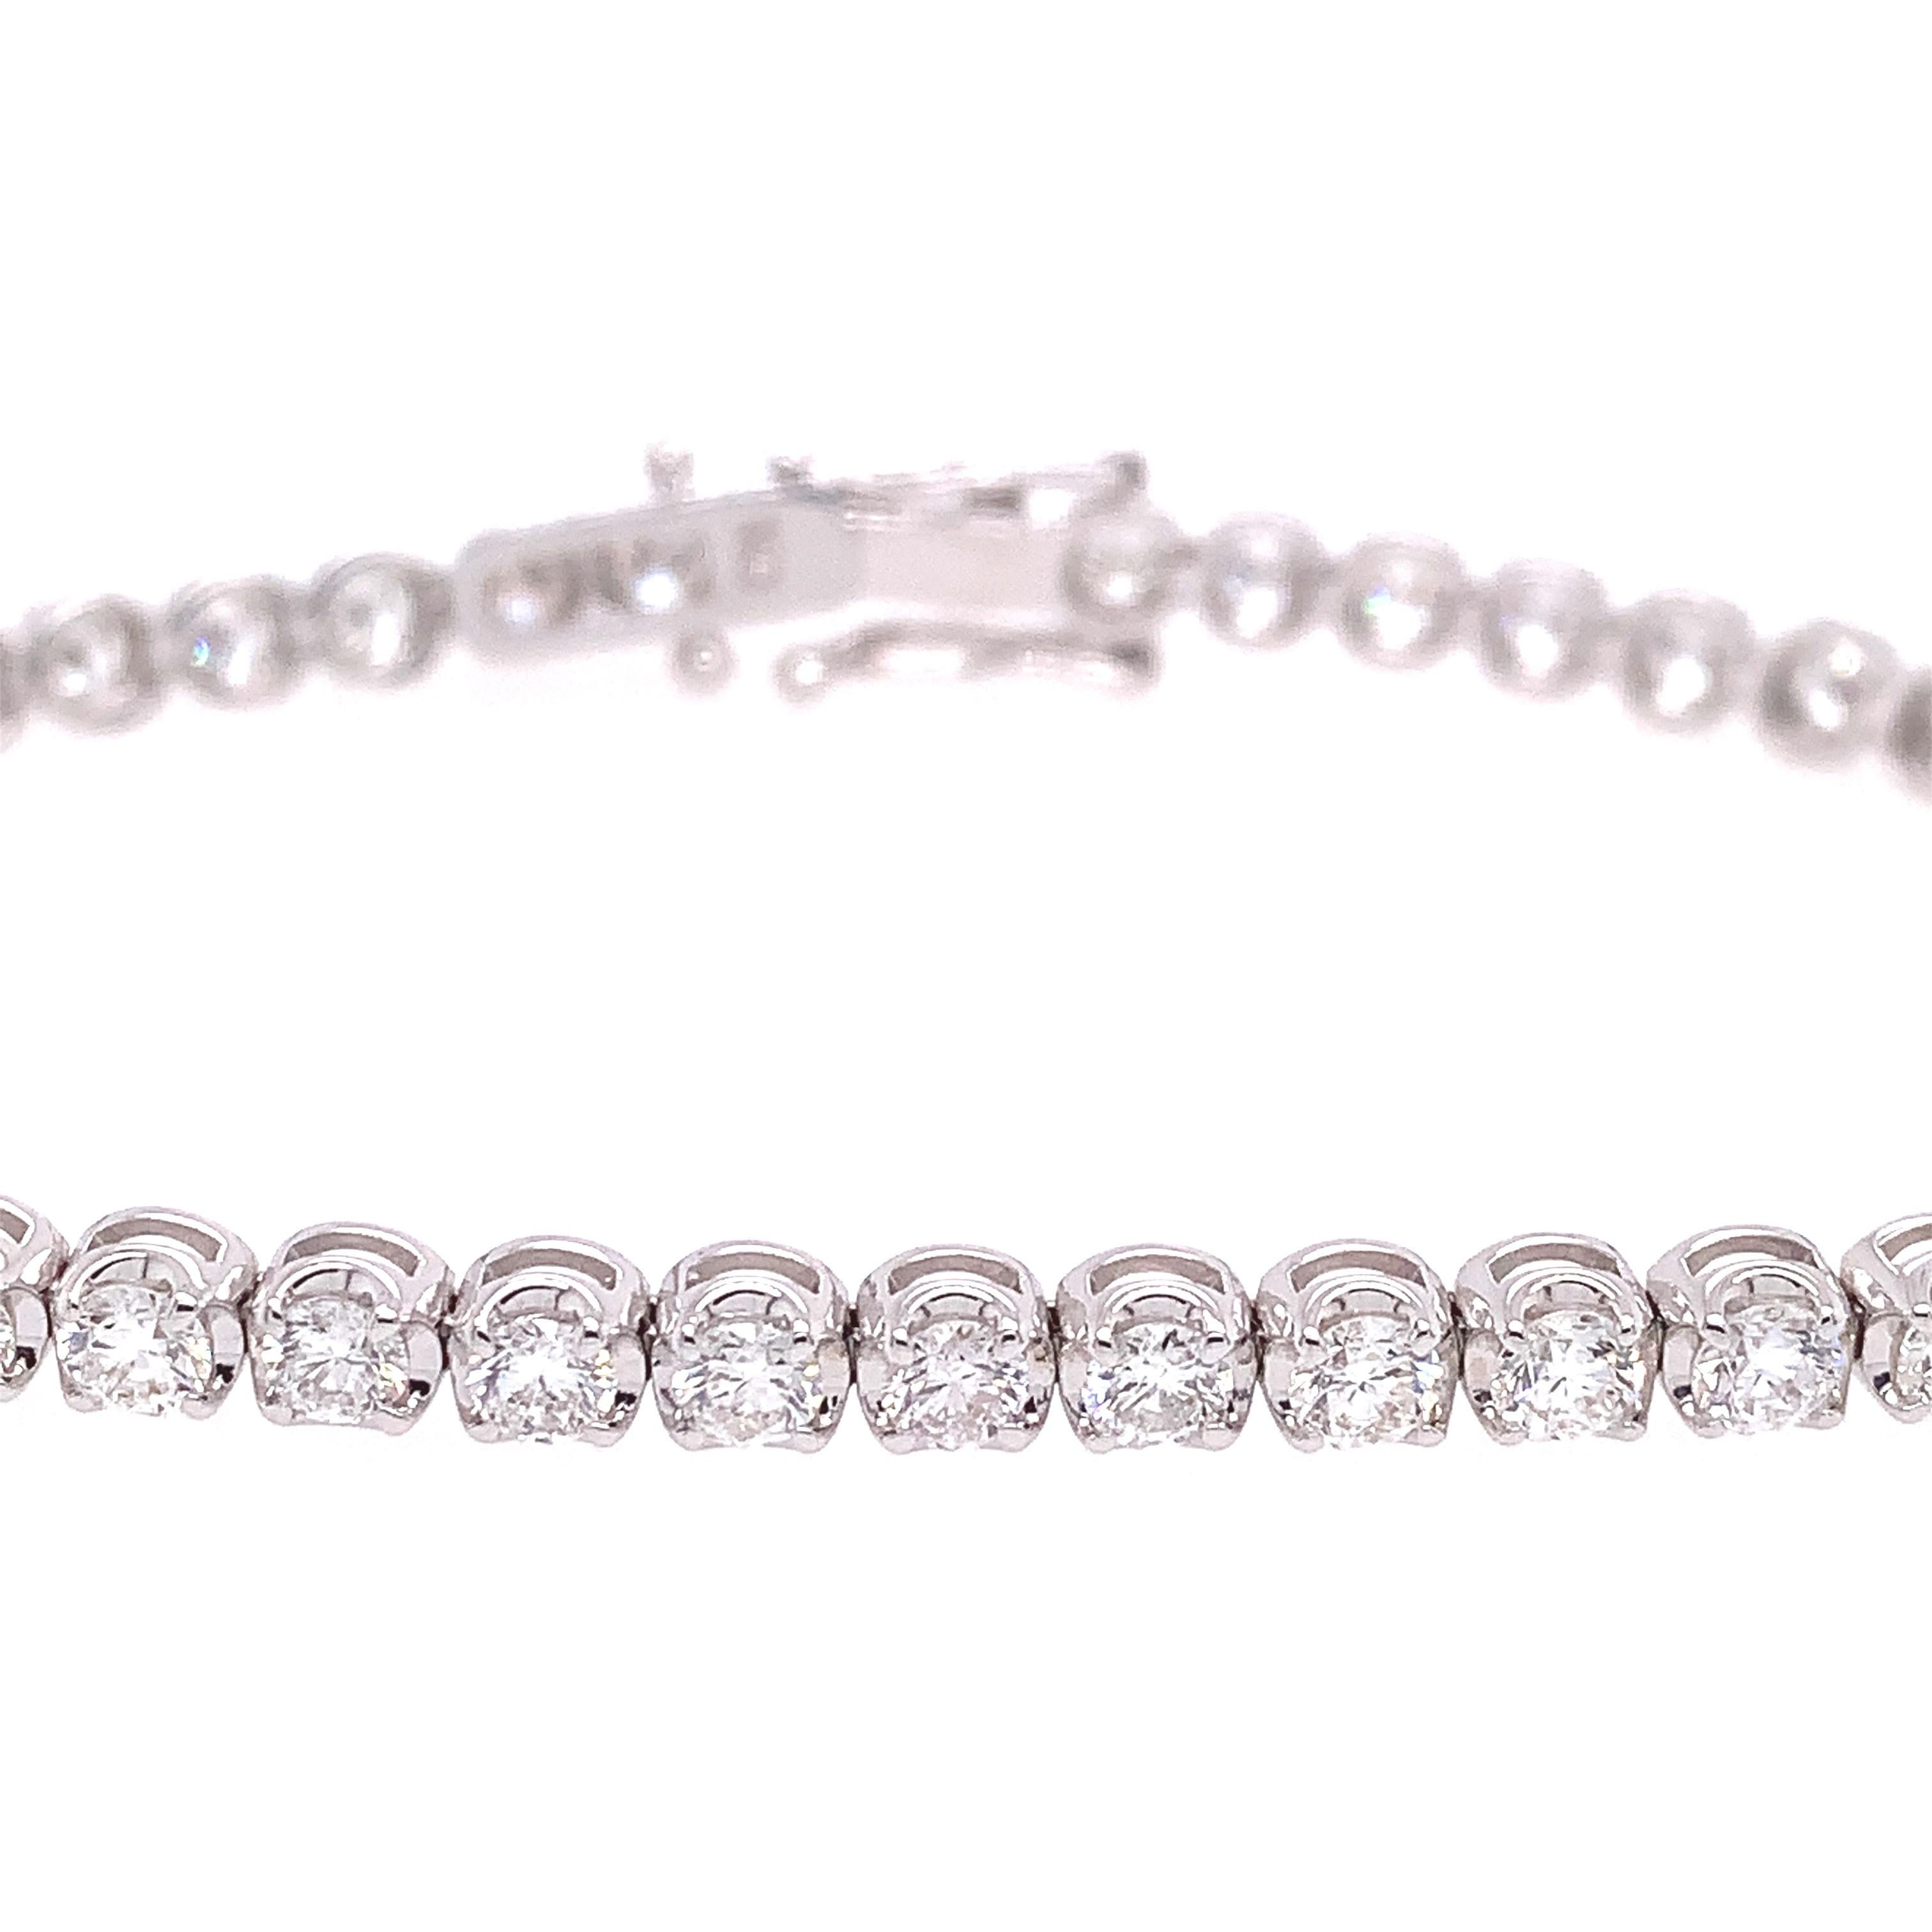 Scintillate Collection

This elegant crown set bracelet adds a touch of radiance and grace to everyday life as it sparkles with 45 brilliant Diamonds totaling 4.46 carats set in exquisite White Gold